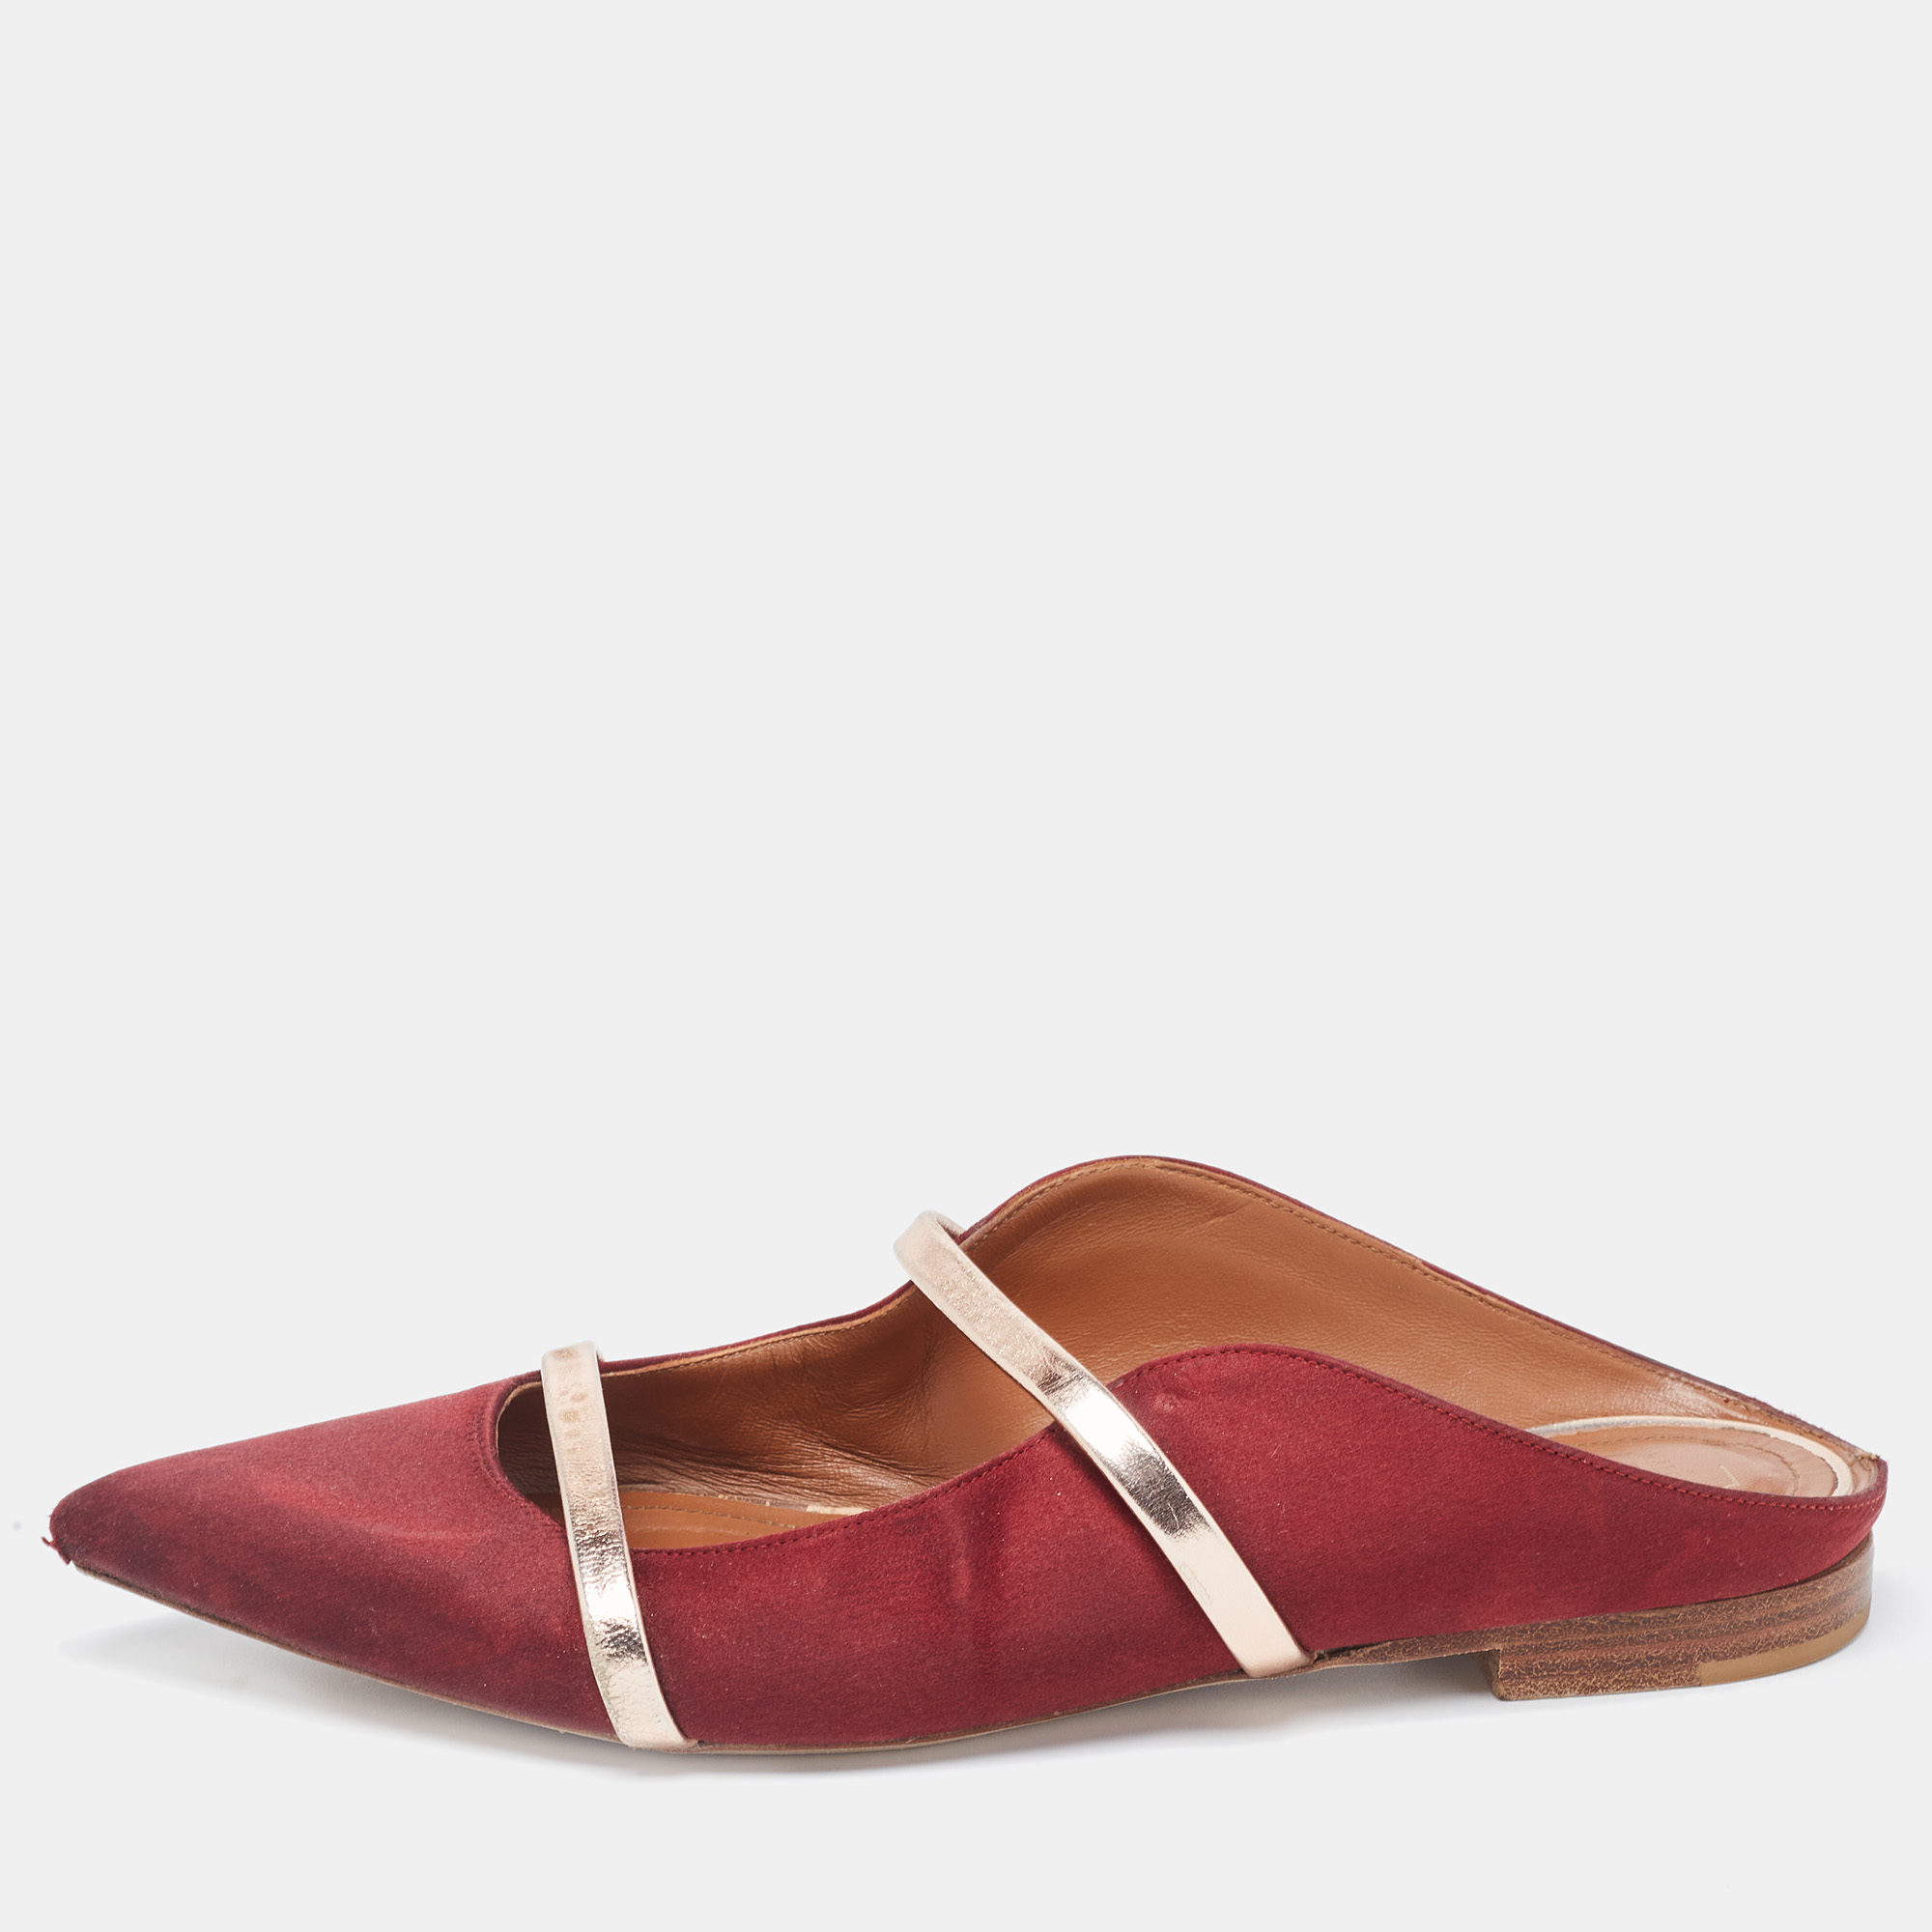 Pre-owned Malone Souliers Burgundy Satin Maureen Flats Size 37.5